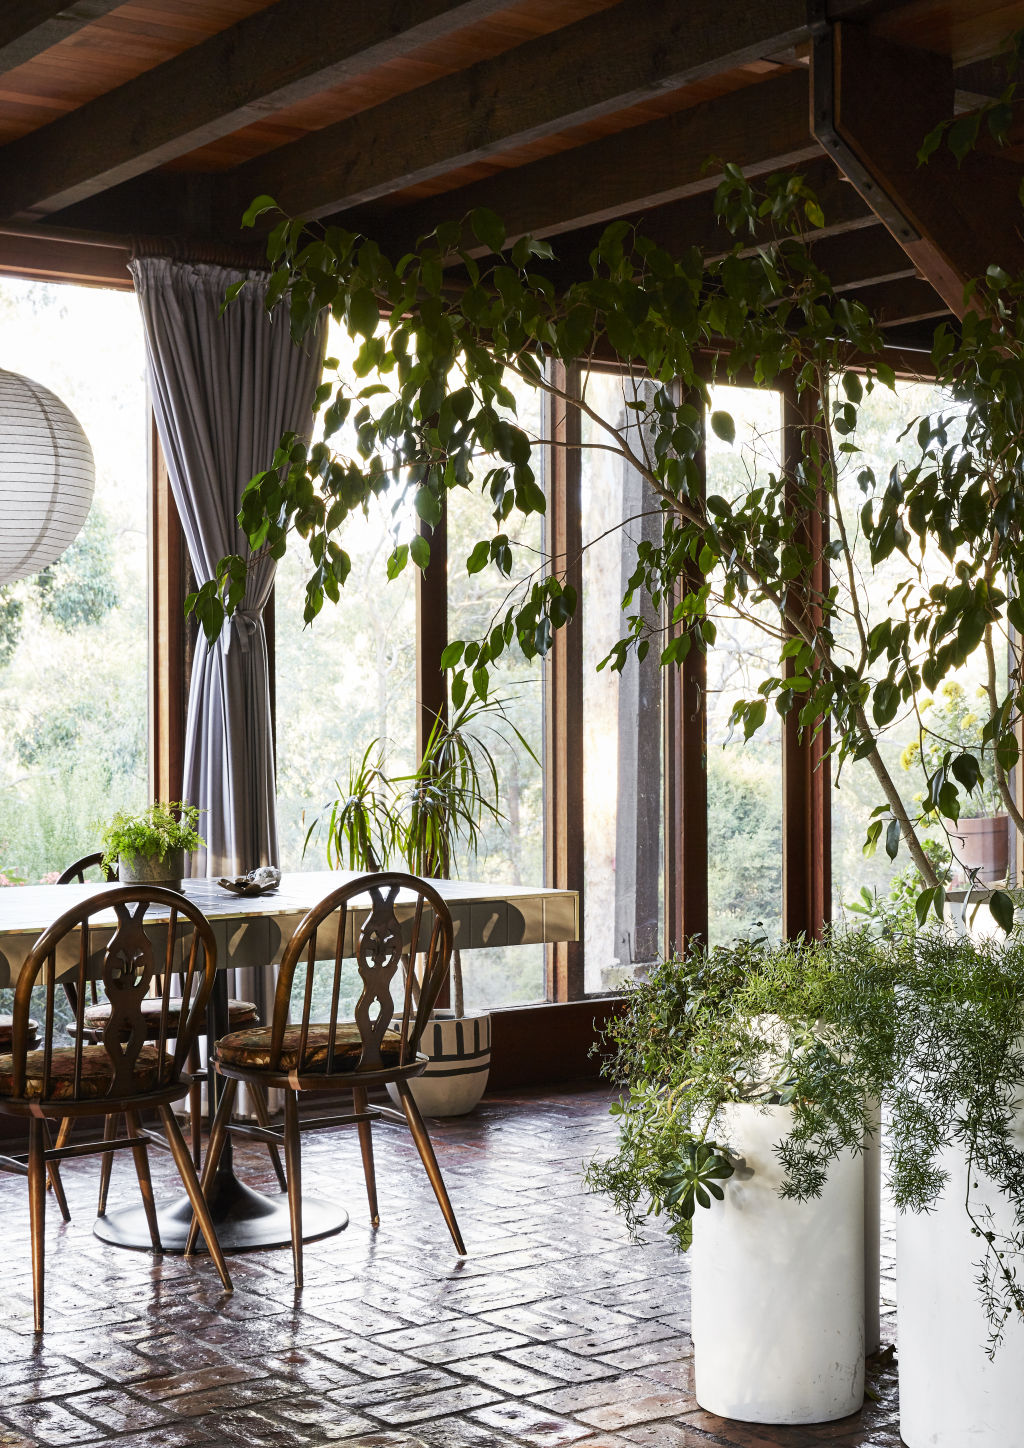 Plenty of indoor greenery creates a wonderful link between interior and exterior. Styling: Annie Portelli. Photo: Caitlin Mills